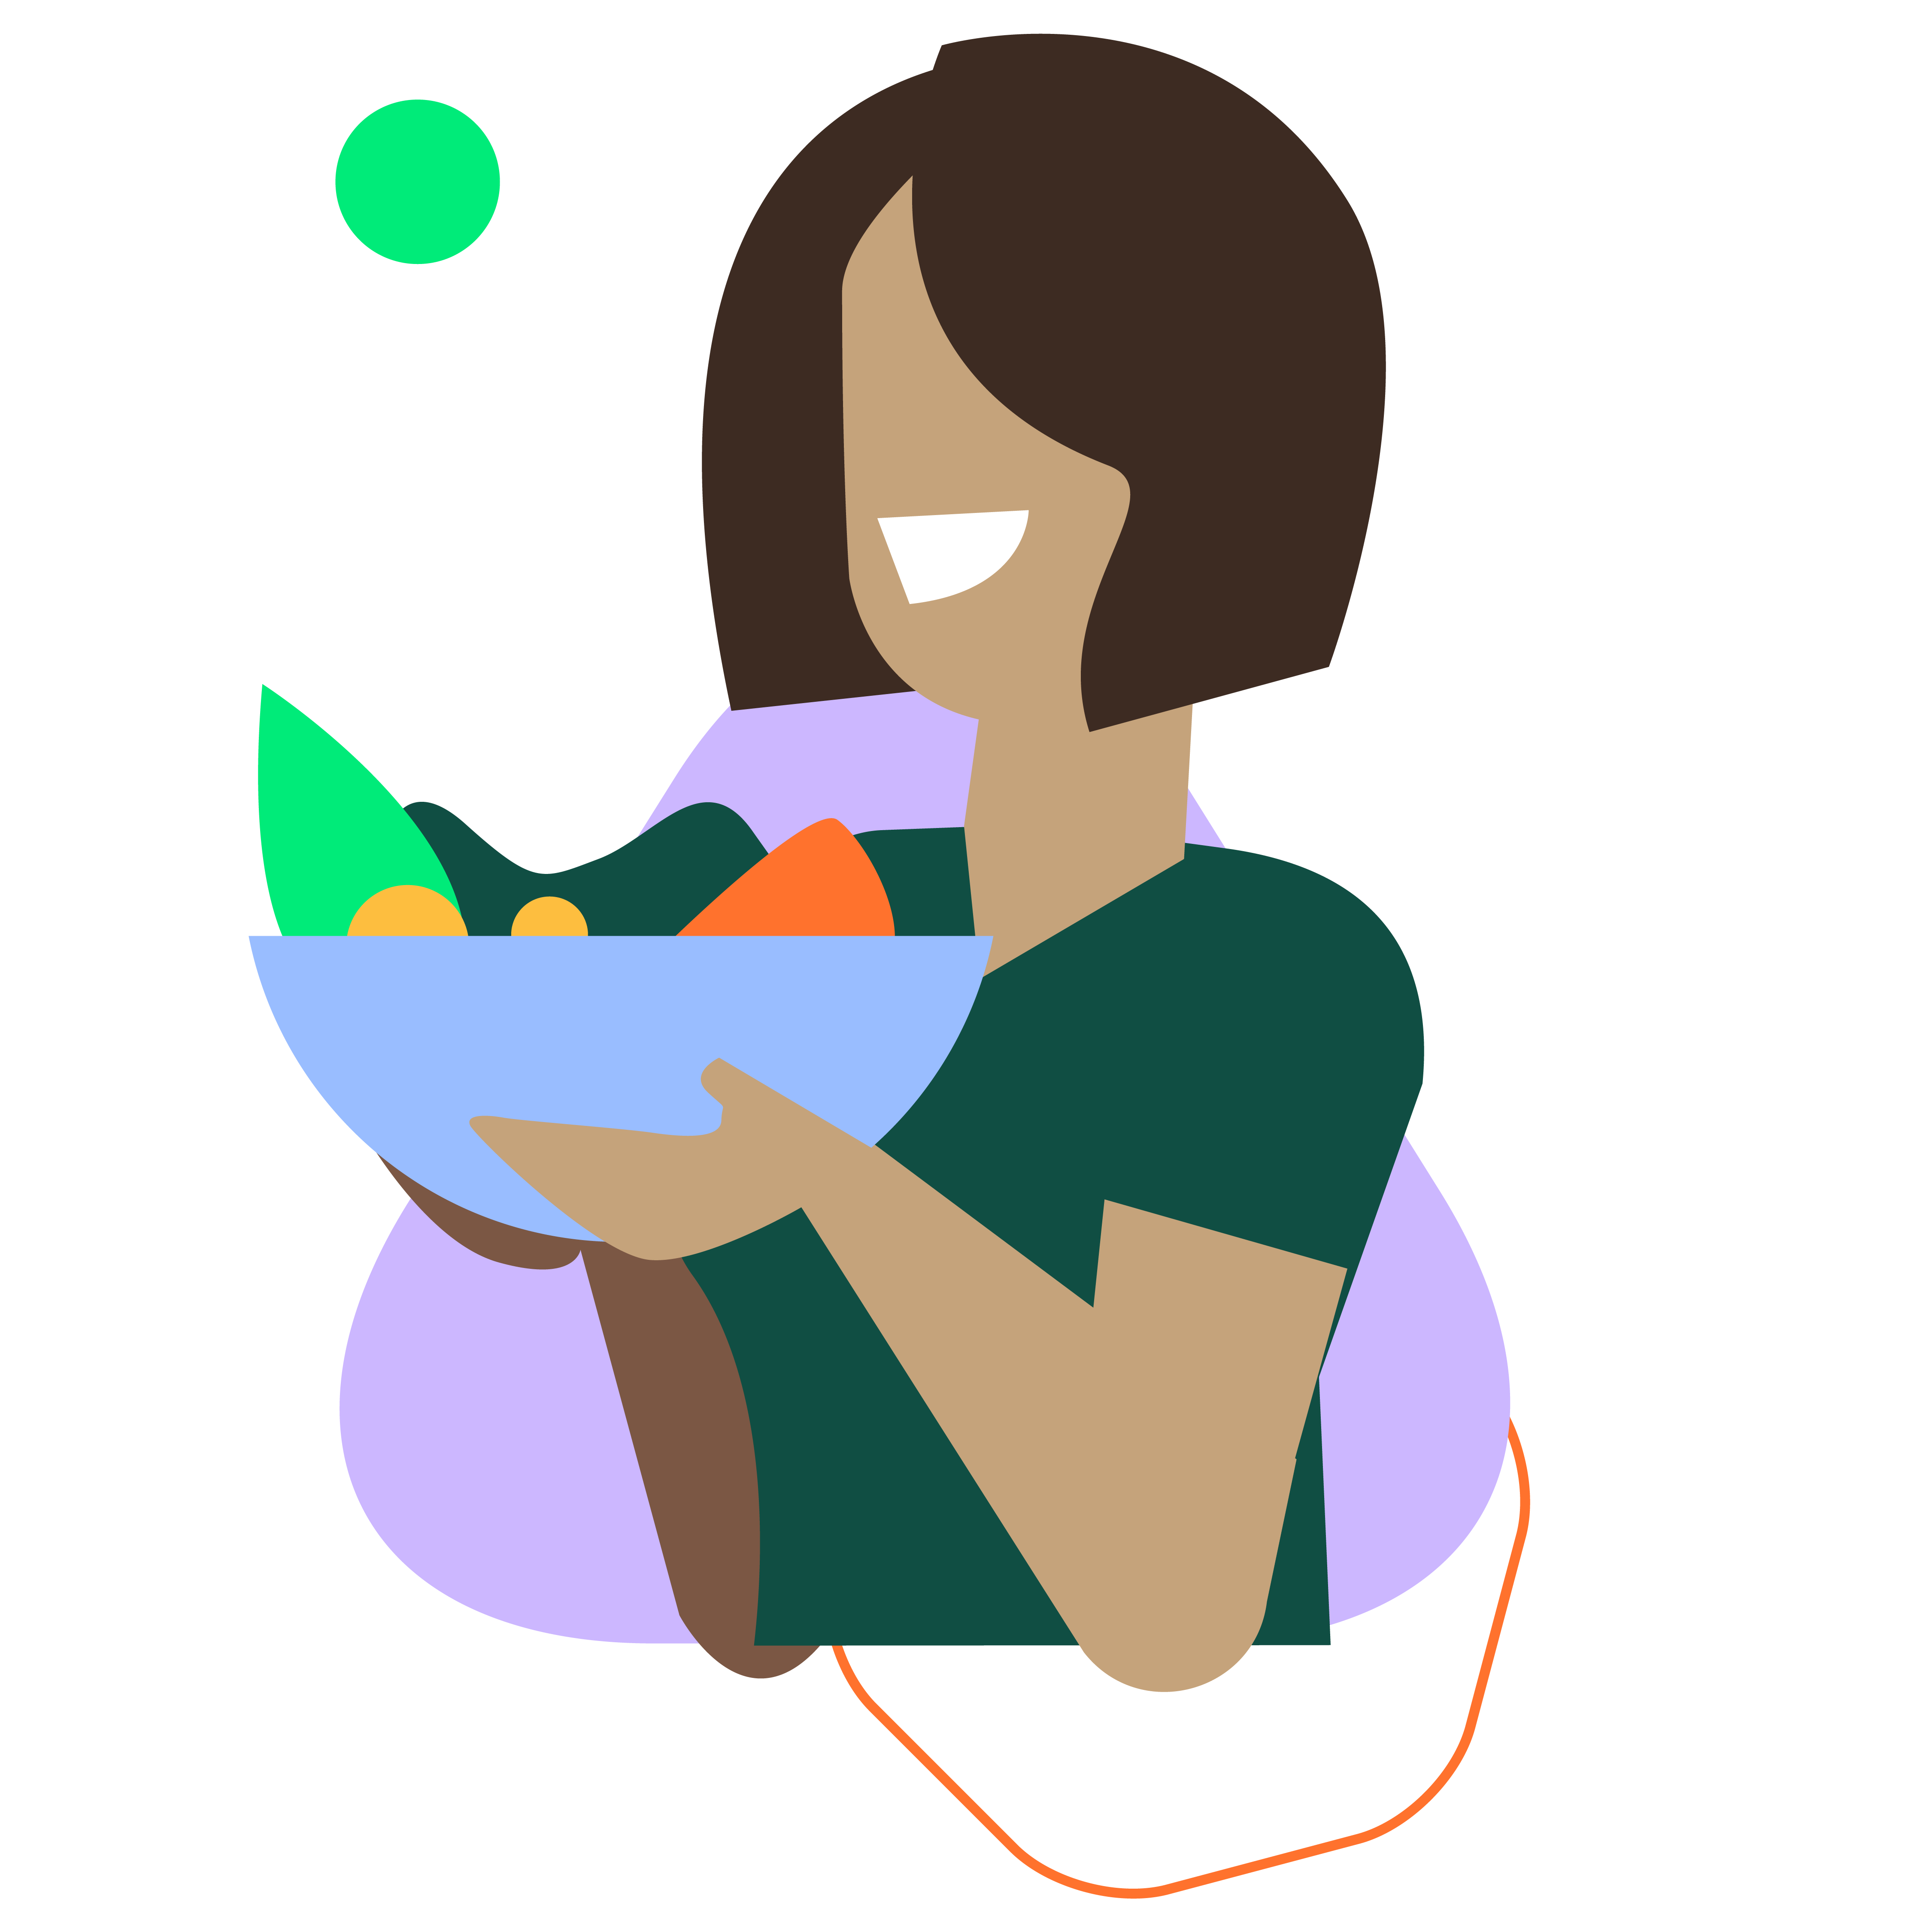 An illustration of a woman smiling holding up a bowl of fruit. She has brown hair and a green t-shirt on.